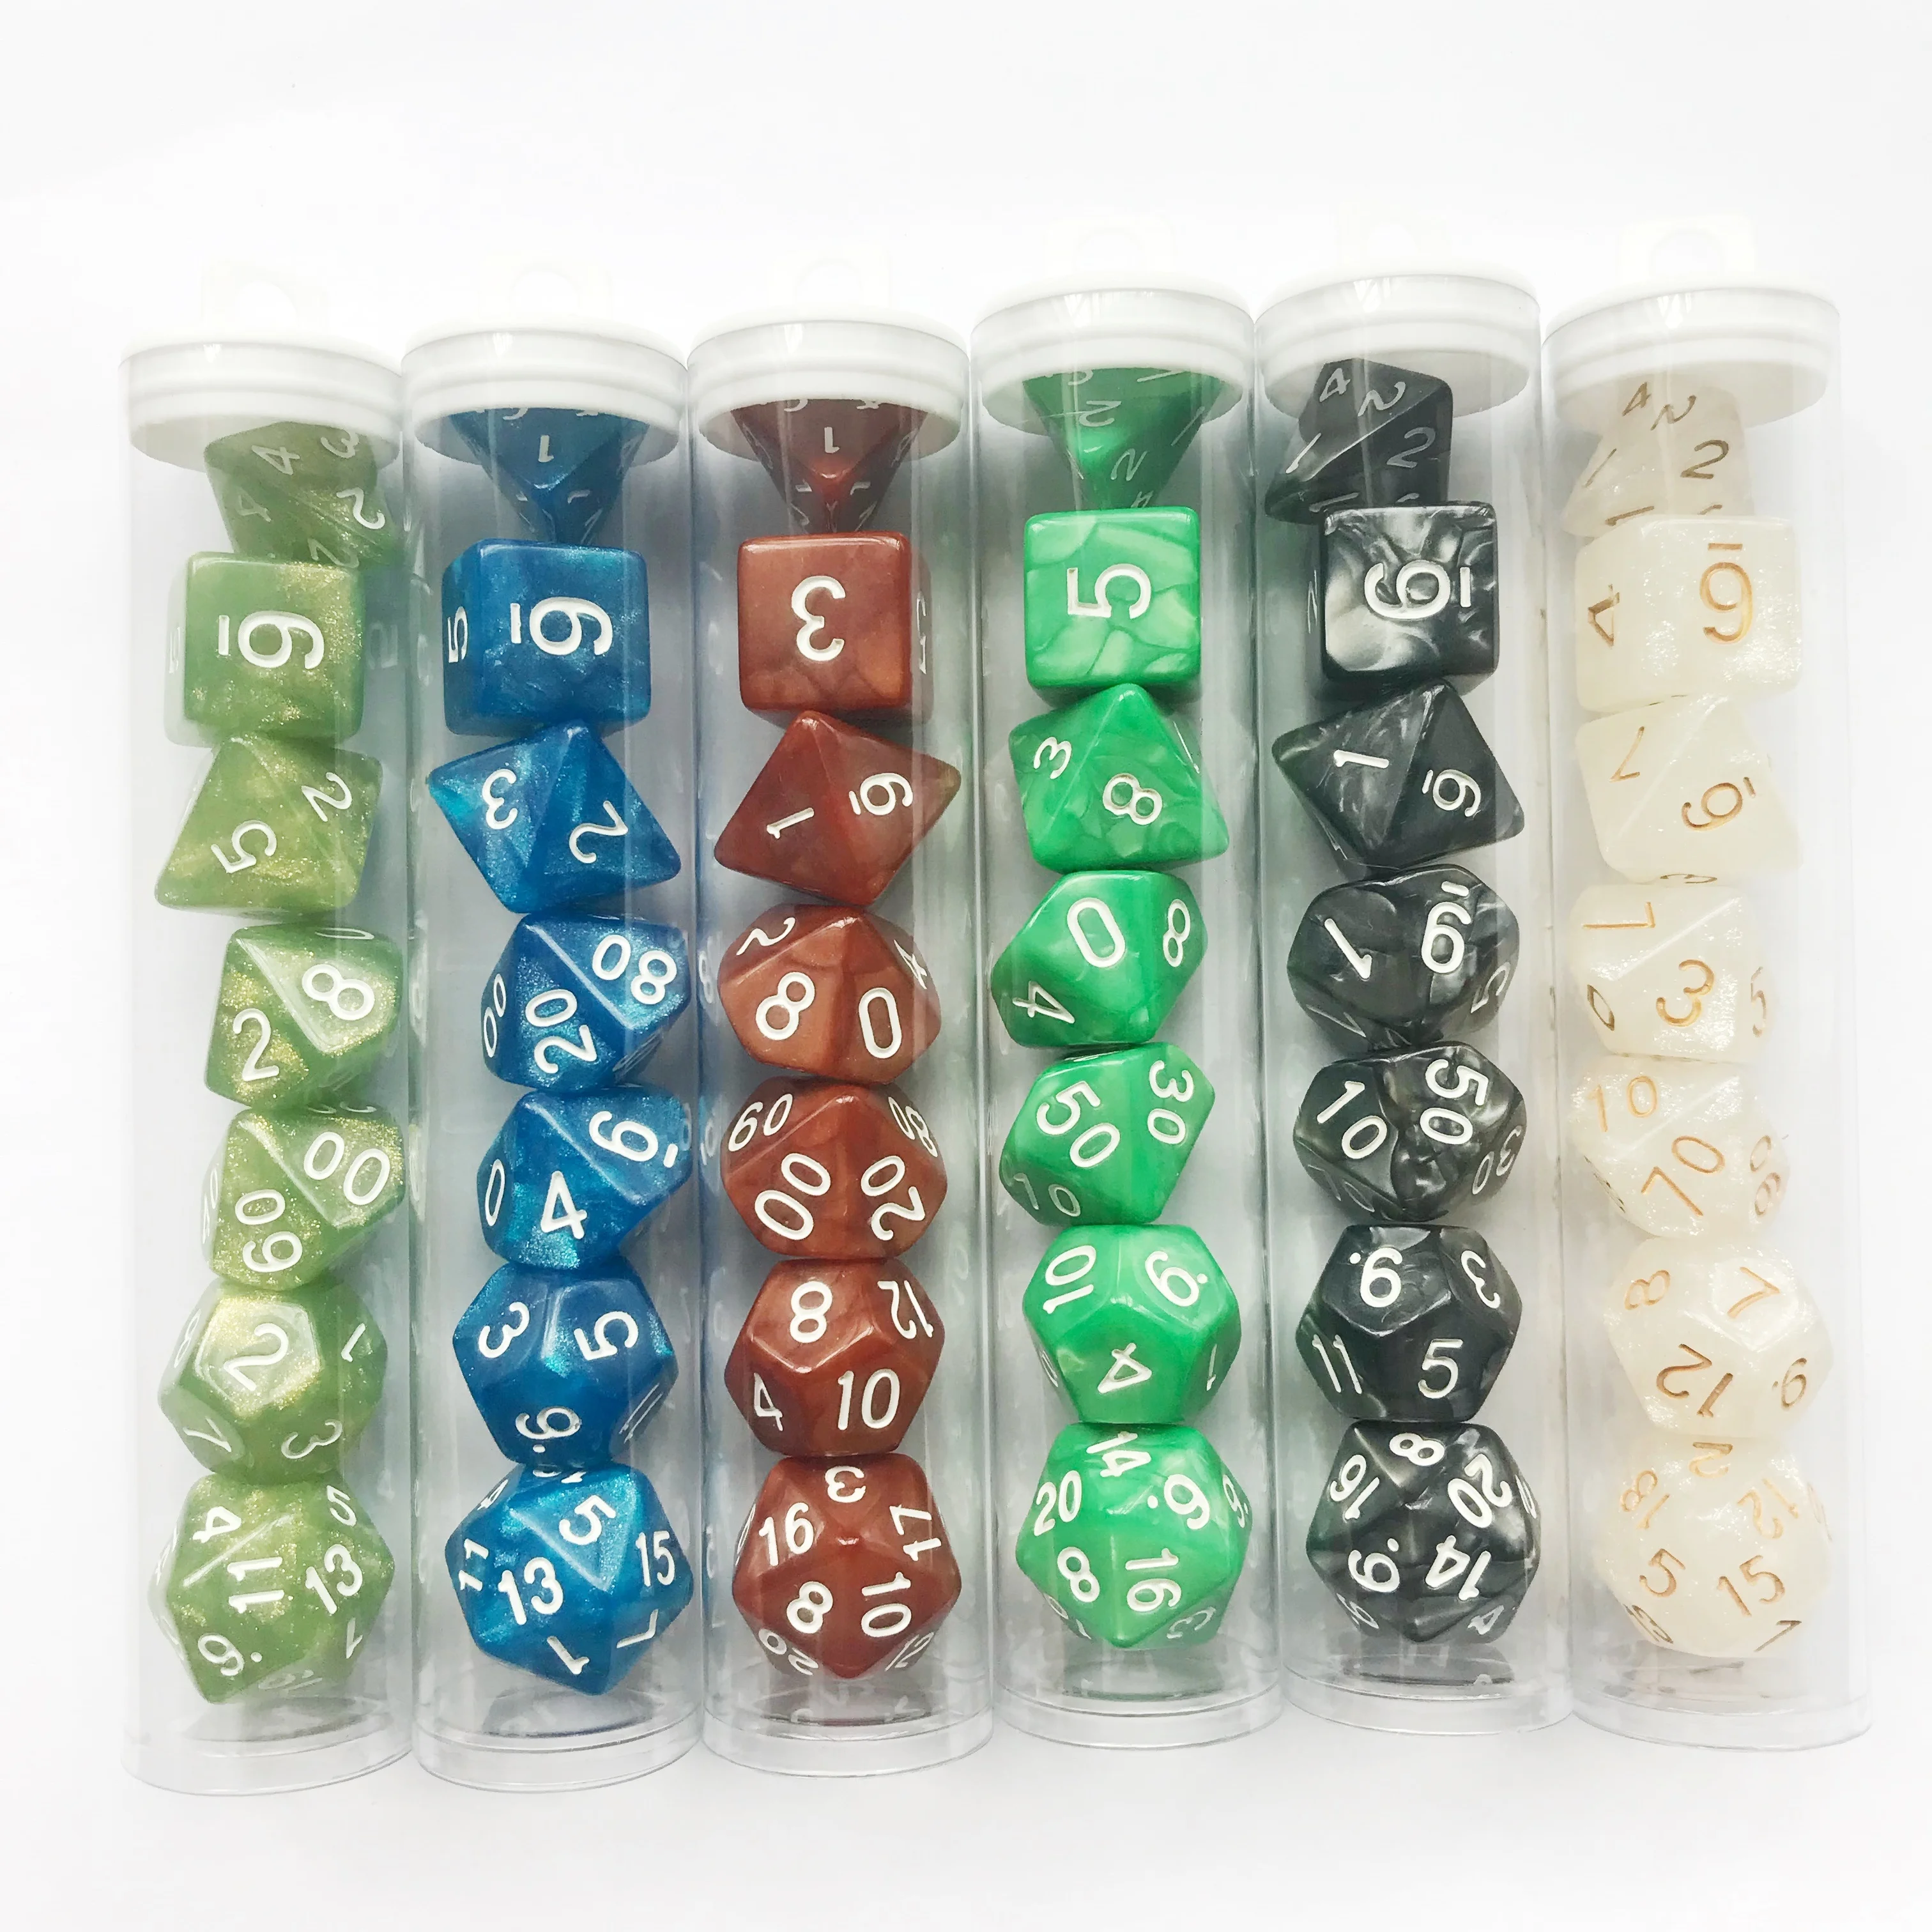 

7 pcs/set Desk Polyhedral Custom Dices 4/6/8/10/12/20 Pear Dice DND Acrylic Plastic in Tube Packaging Multi Sides Gaming, Color